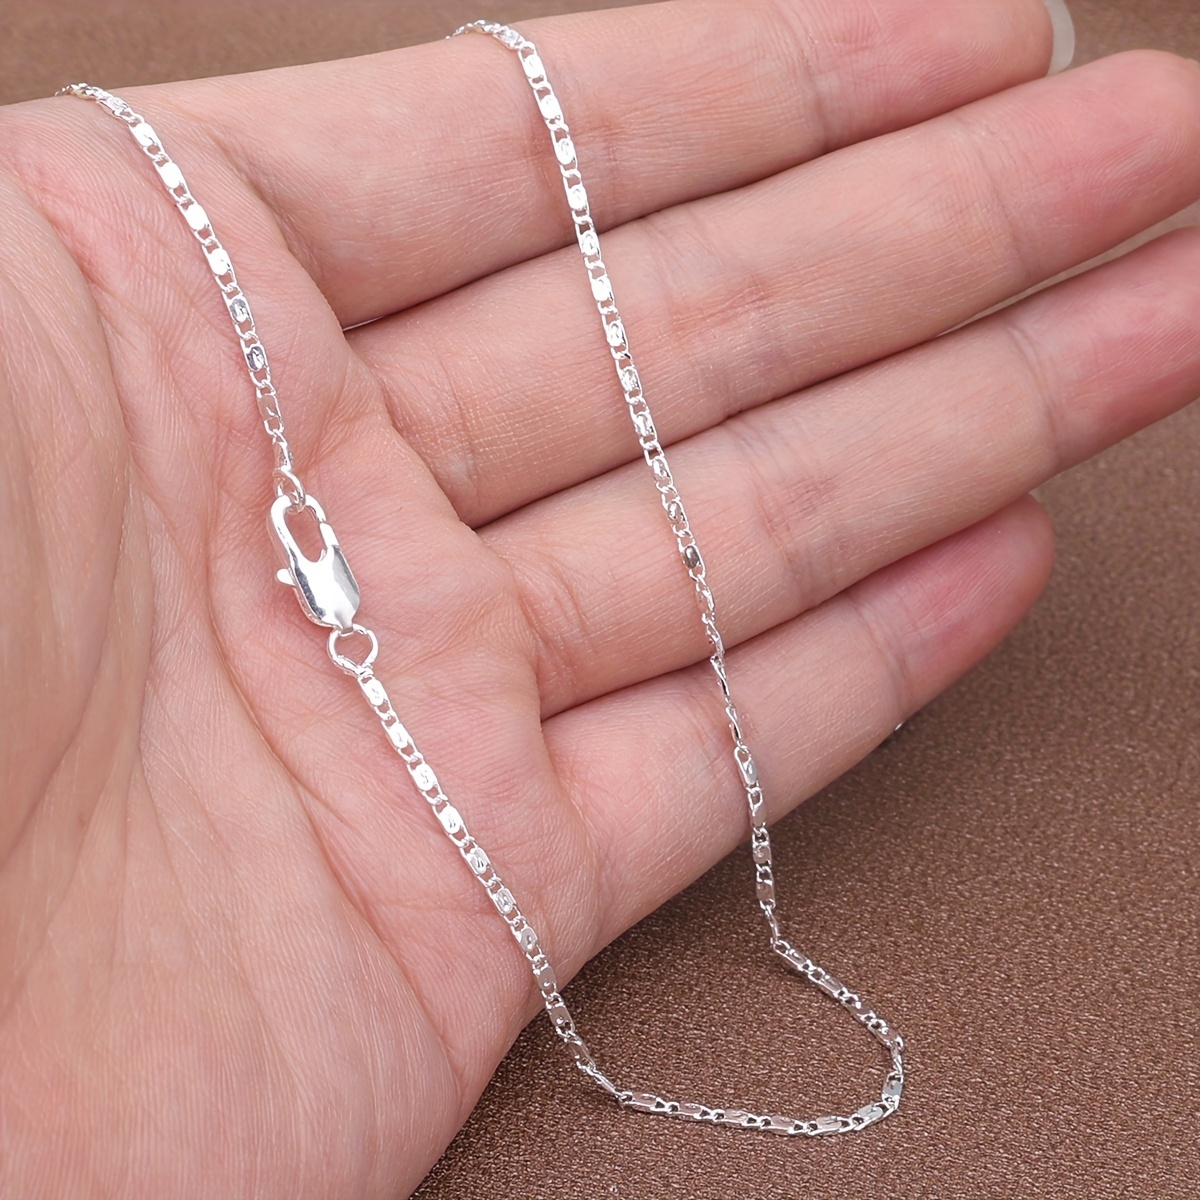 

1pcs High-grade European Style Flat Necklace With Silver Star Plate 2mm Silver Plated Necklace Chain 16-30 Inches For Women's Daily Wedding Party Wearing Or Gift